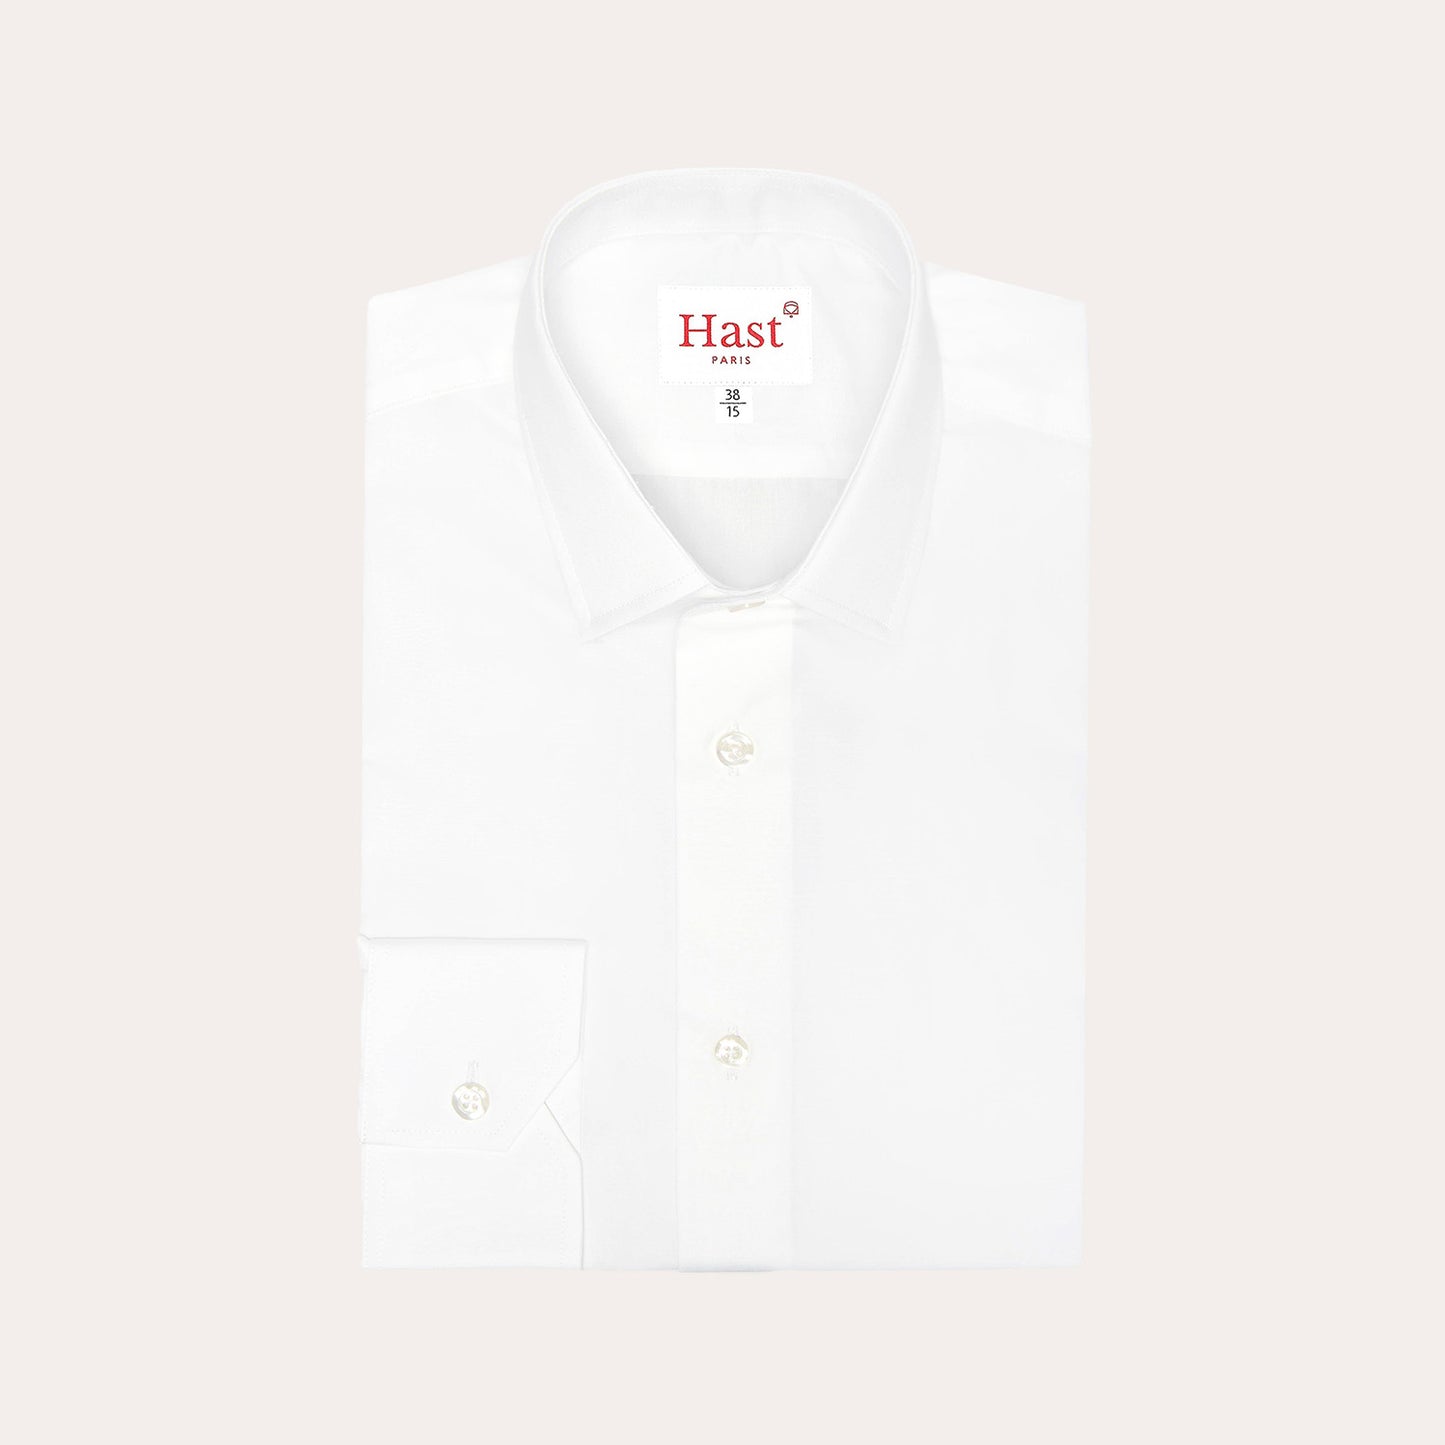 Fitted shirt in white double-twisted poplin